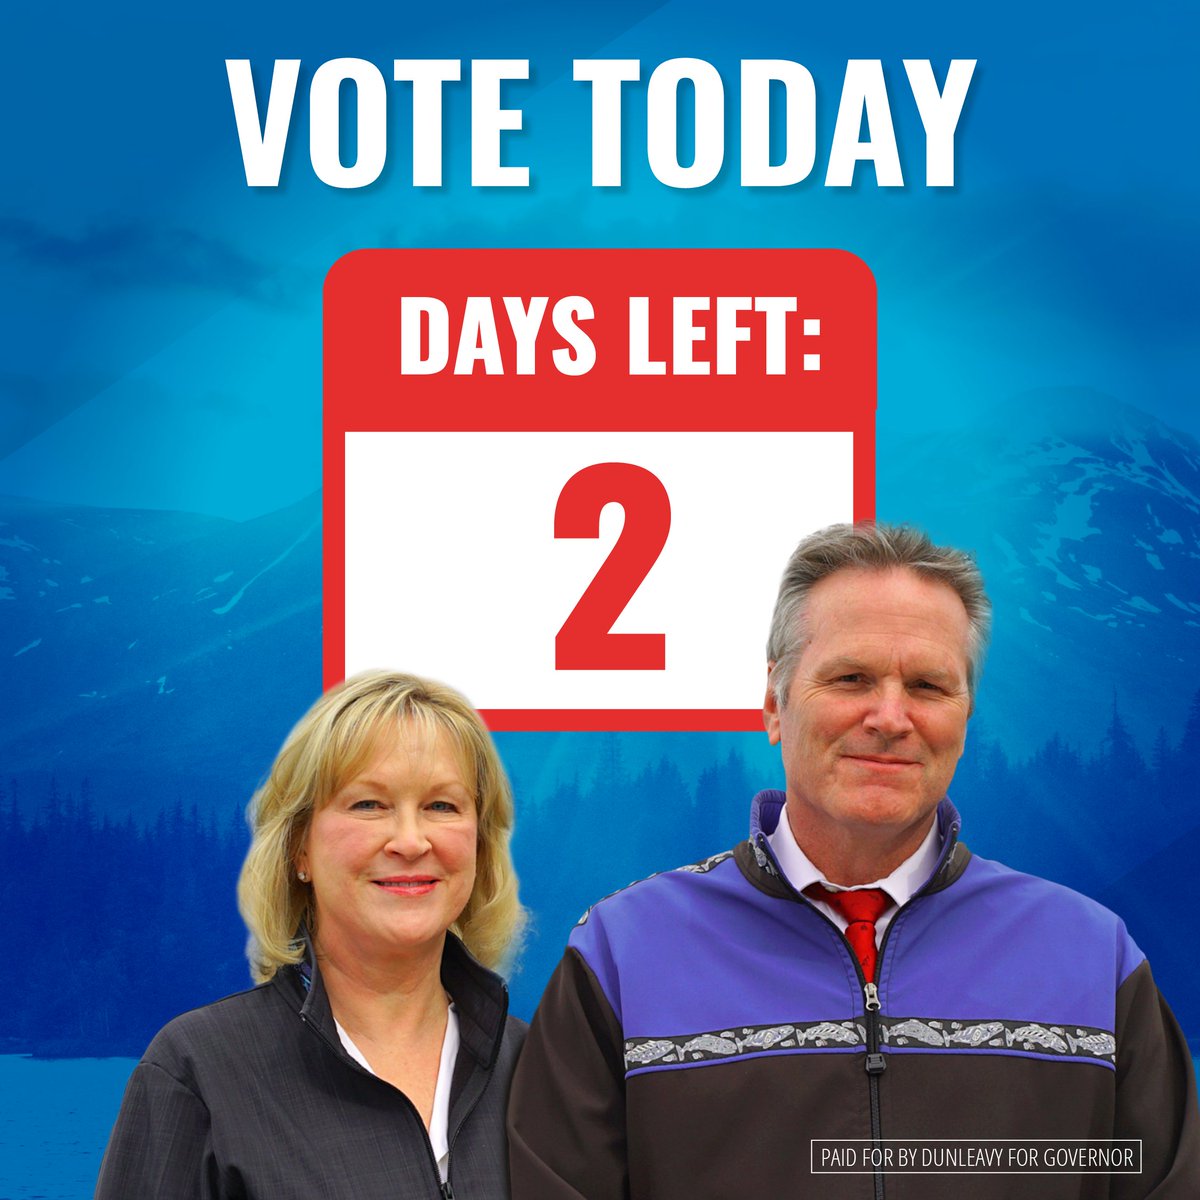 REMEMBER to vote either today or tomorrow! Ask your friends and family to make a plan to vote. Check out locations here: elections.alaska.gov/avo/